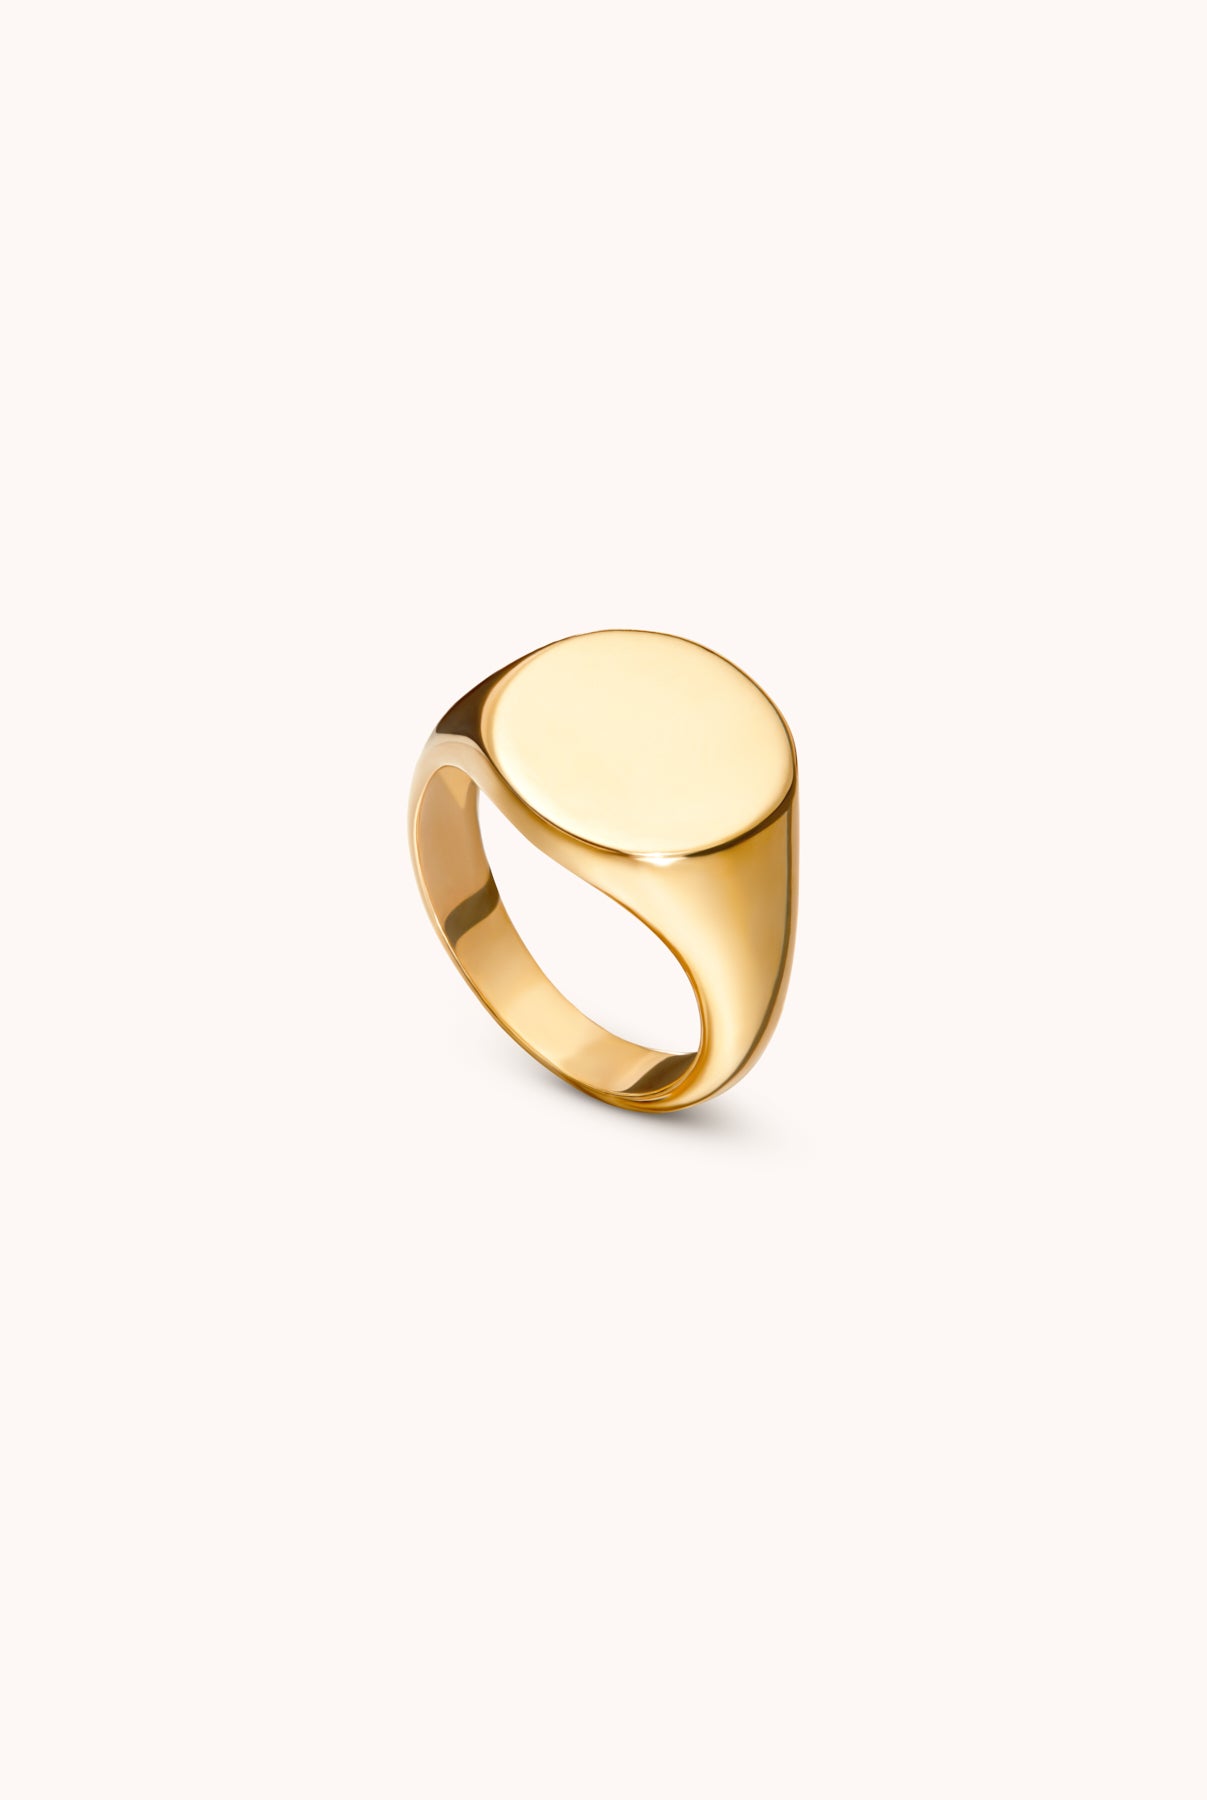 CLASSIC GOLD SIGNET RING